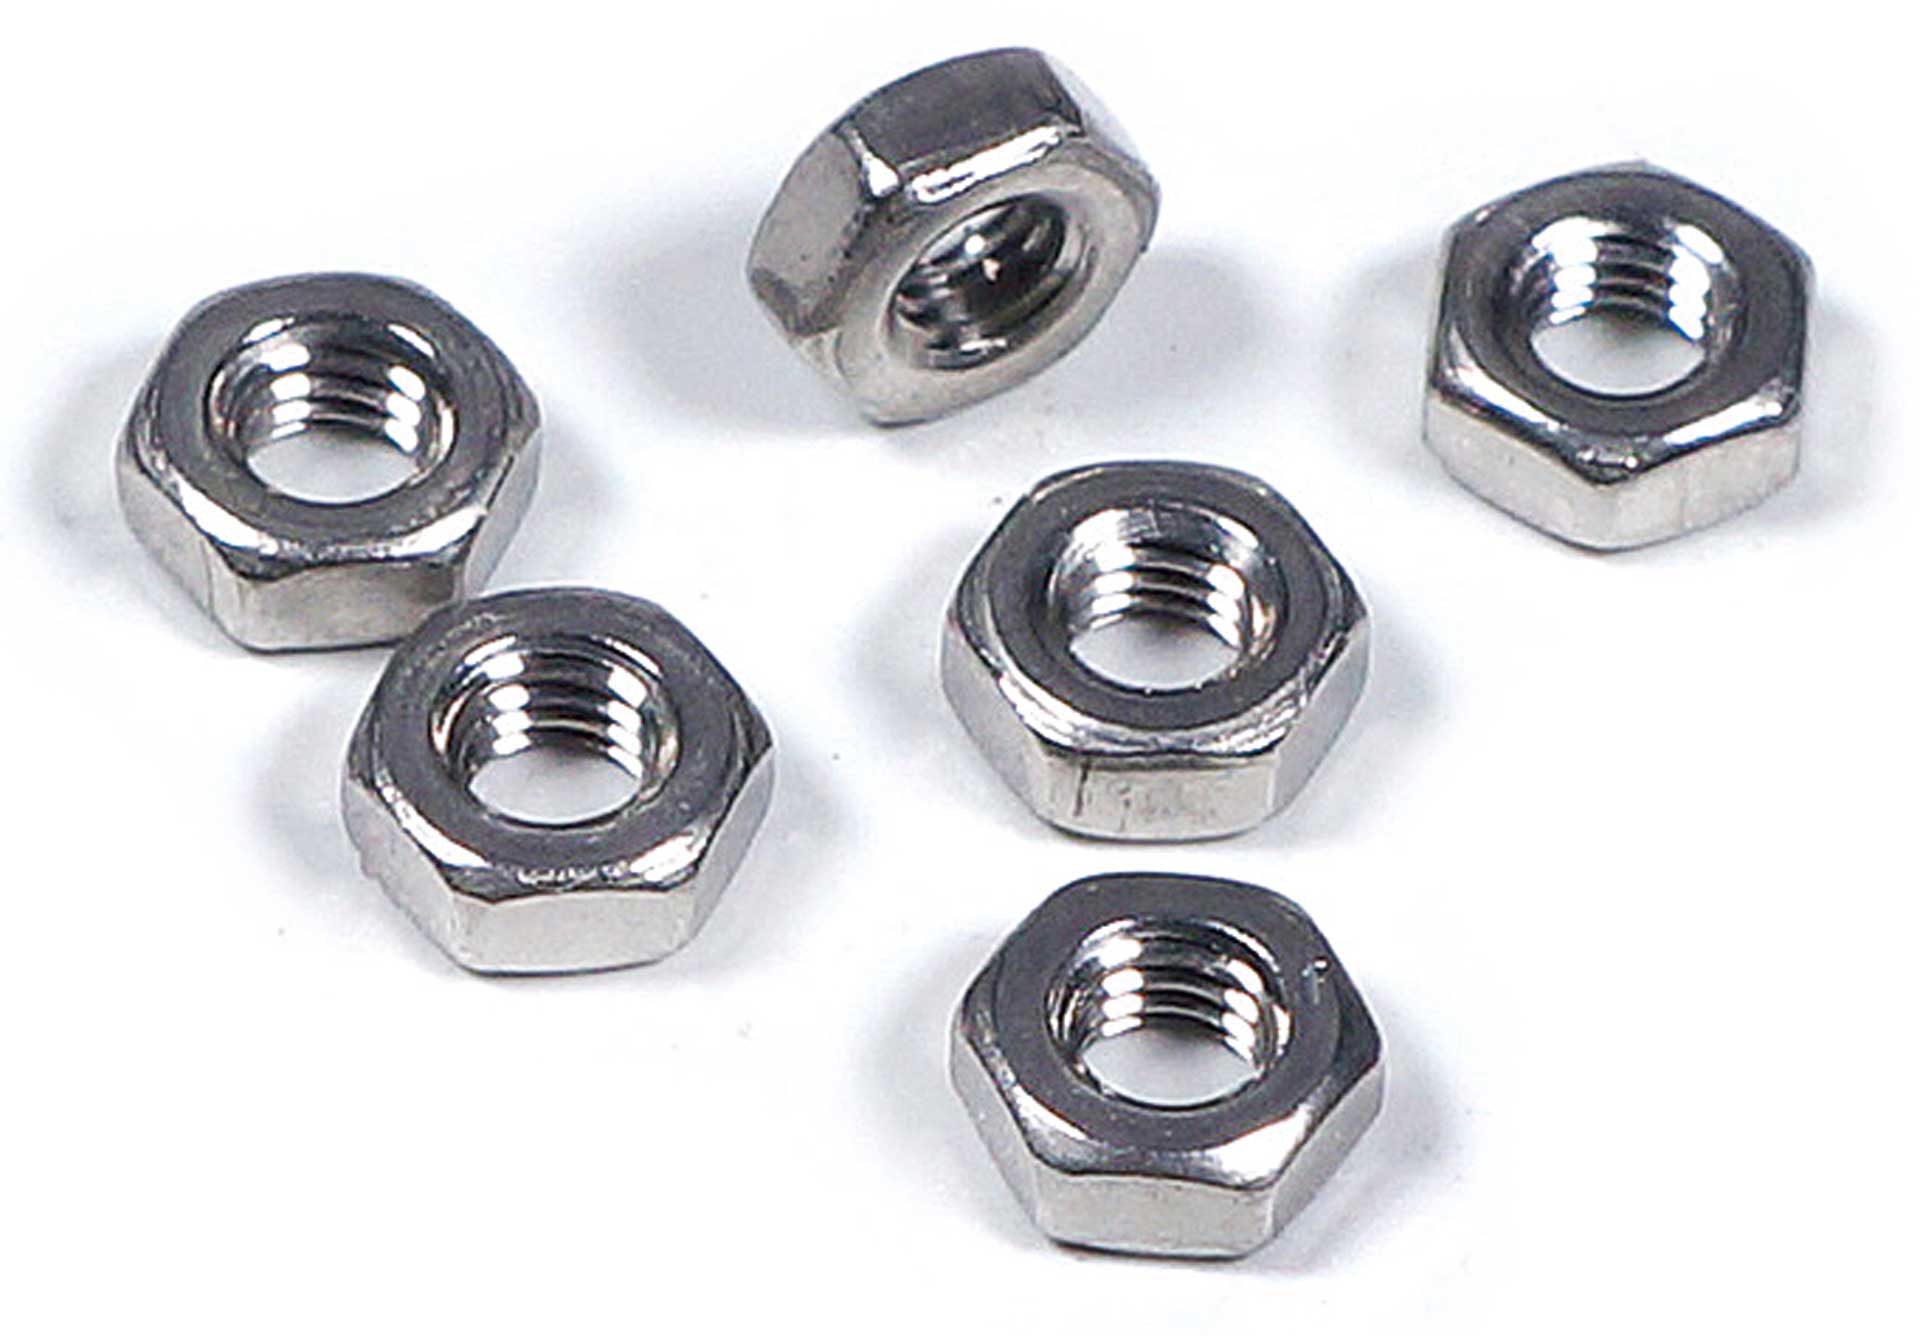 Robbe Modellsport Nuts M5 30pcs. stainless steel